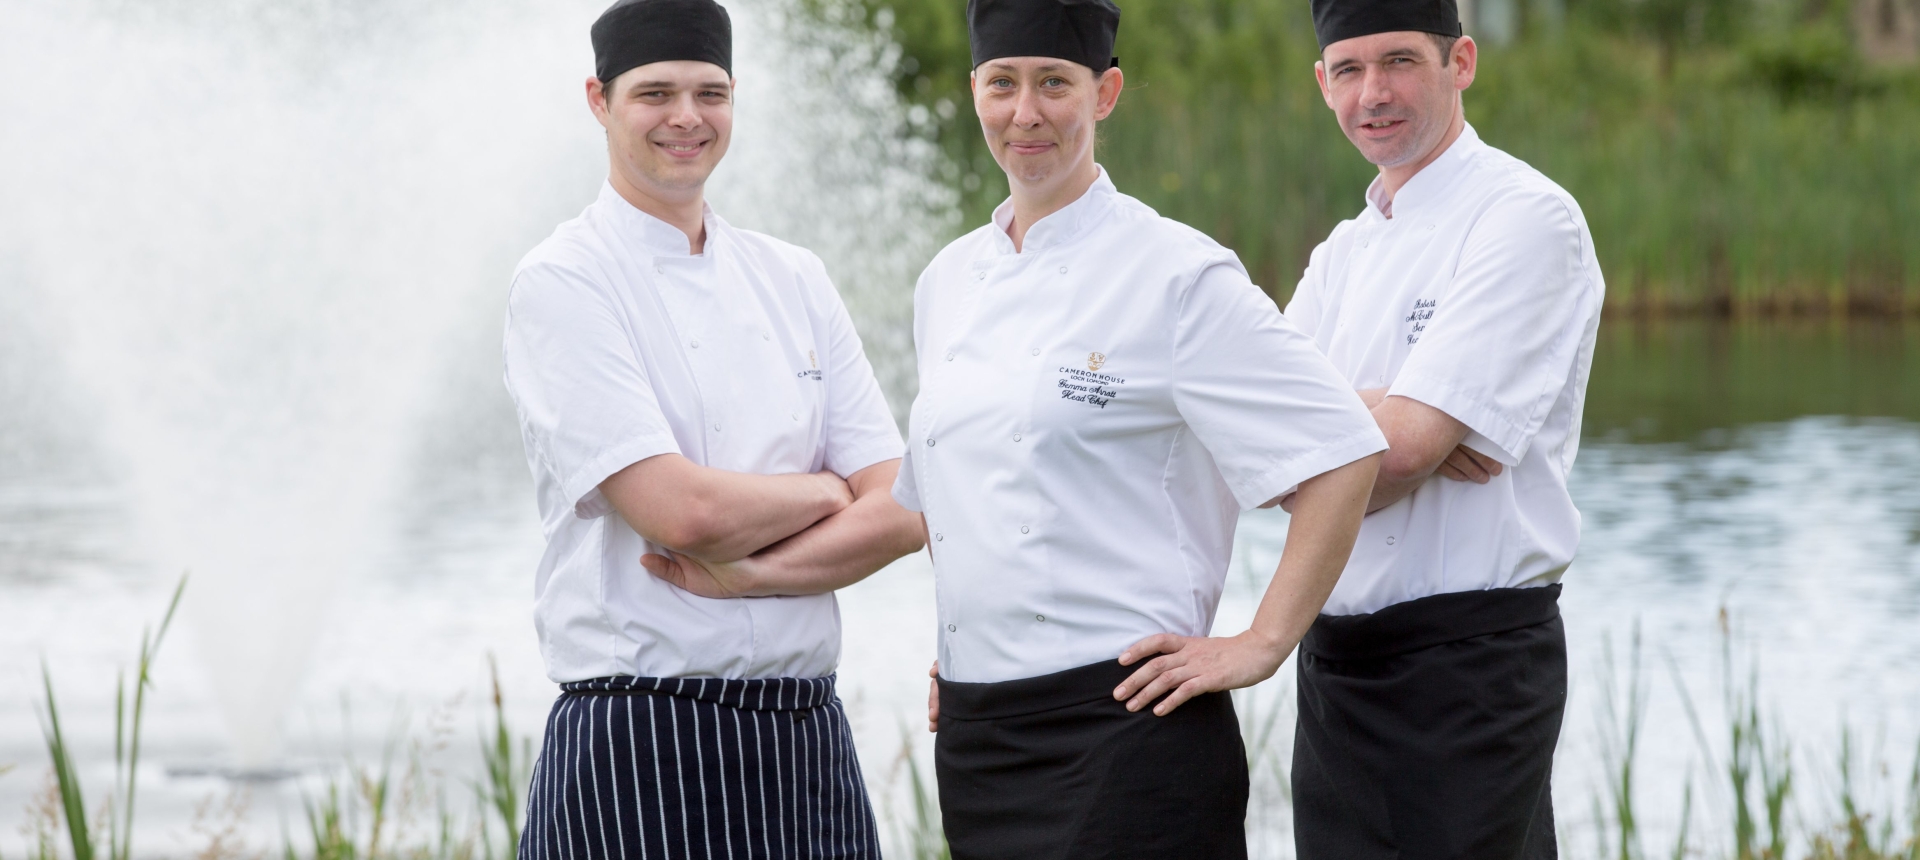 Three Cameron House chefs standing together in front of a water fountain